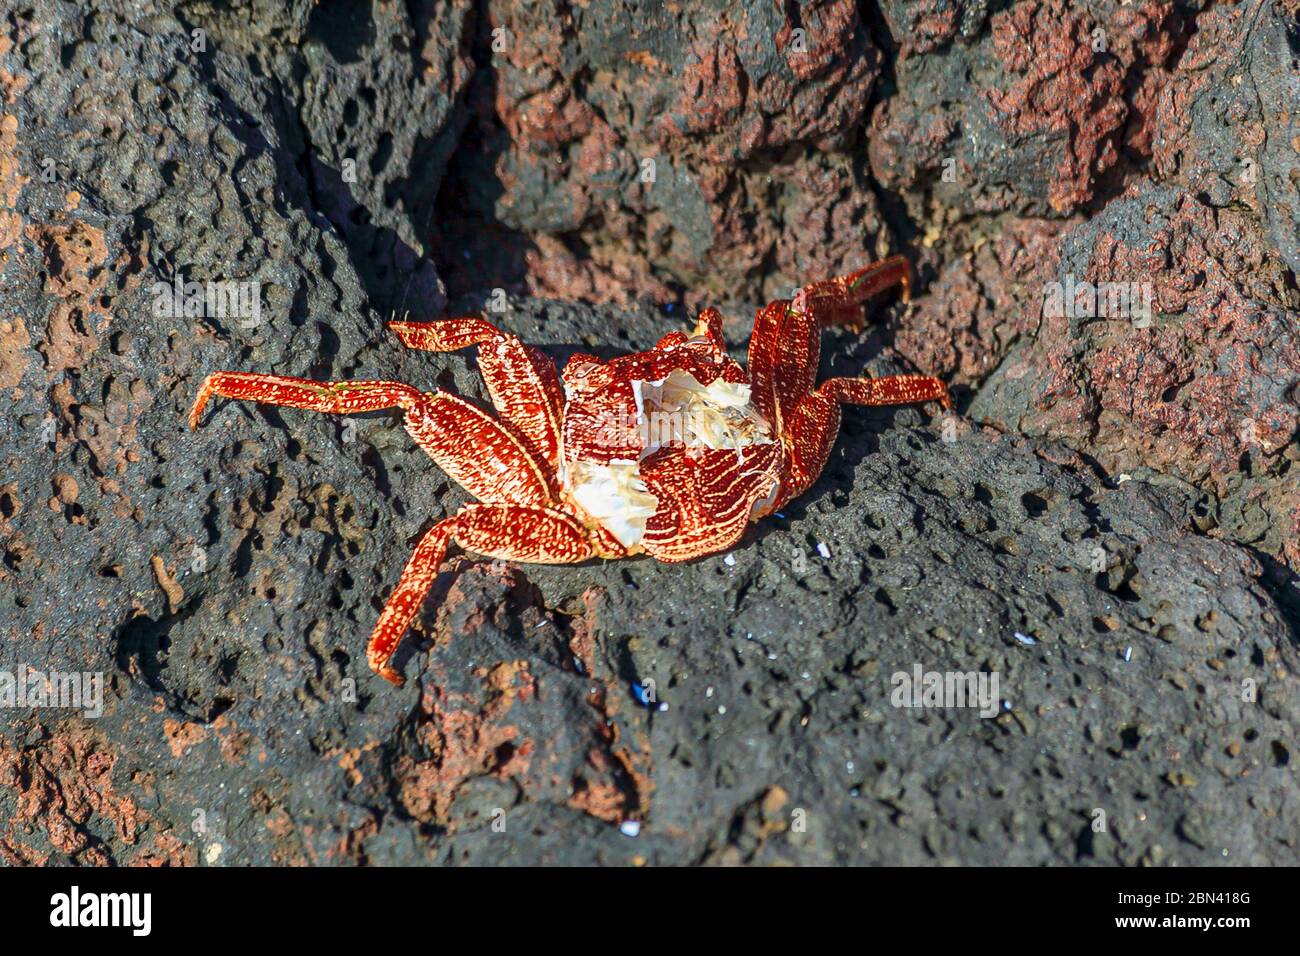 Carcass of a dead crab on the rocks of a coastal area Stock Photo